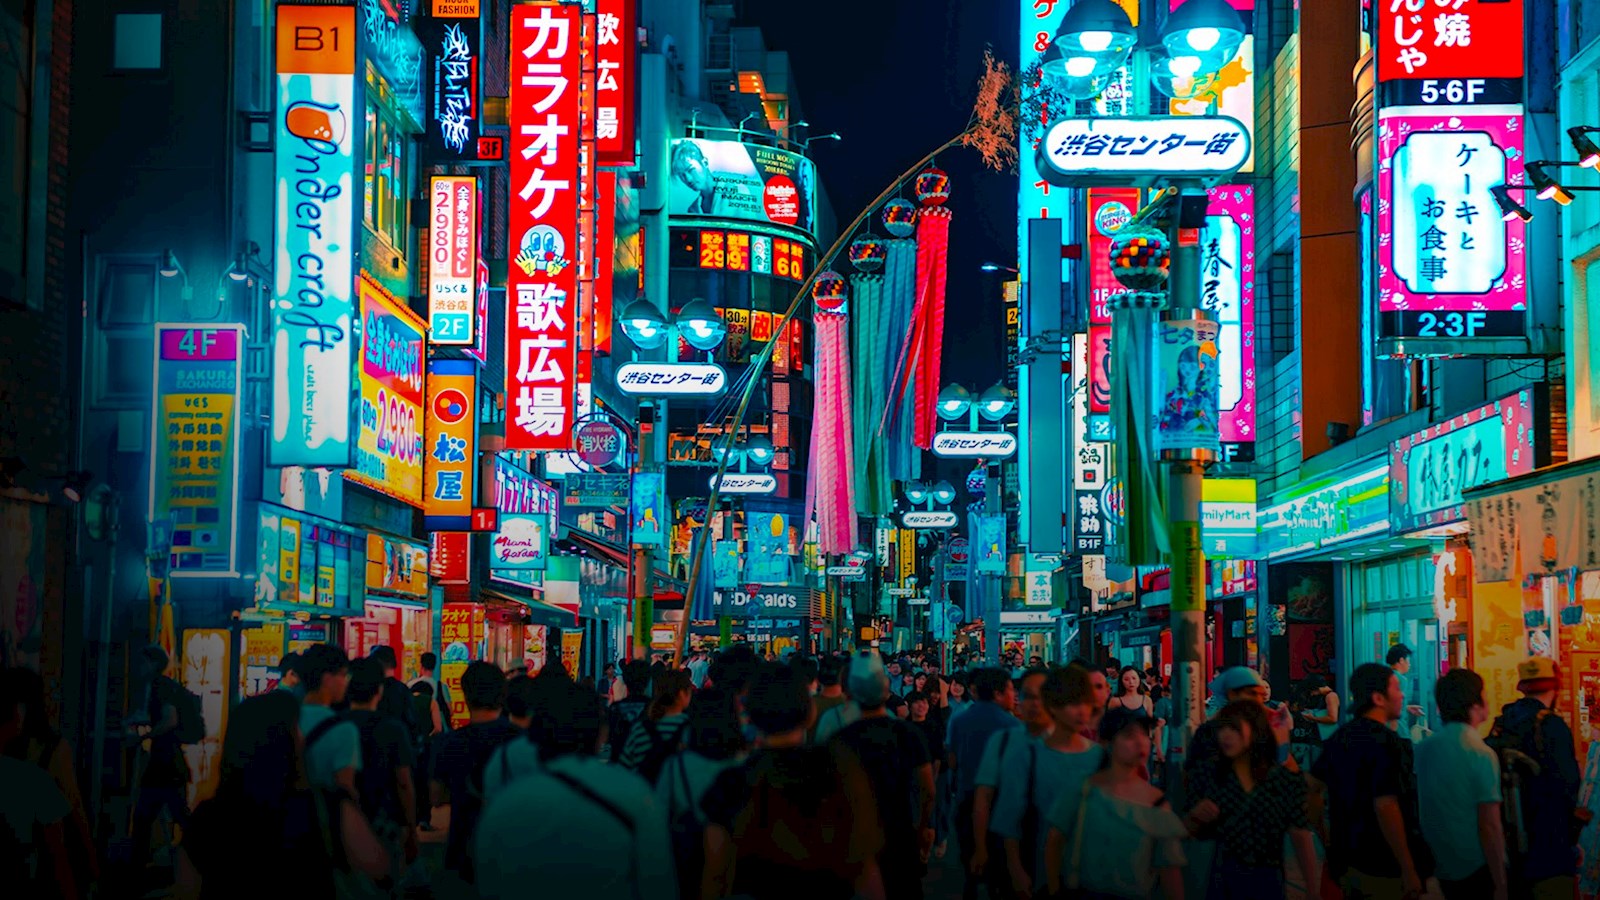 Japanese city landscape with brightly lit street and lots of people